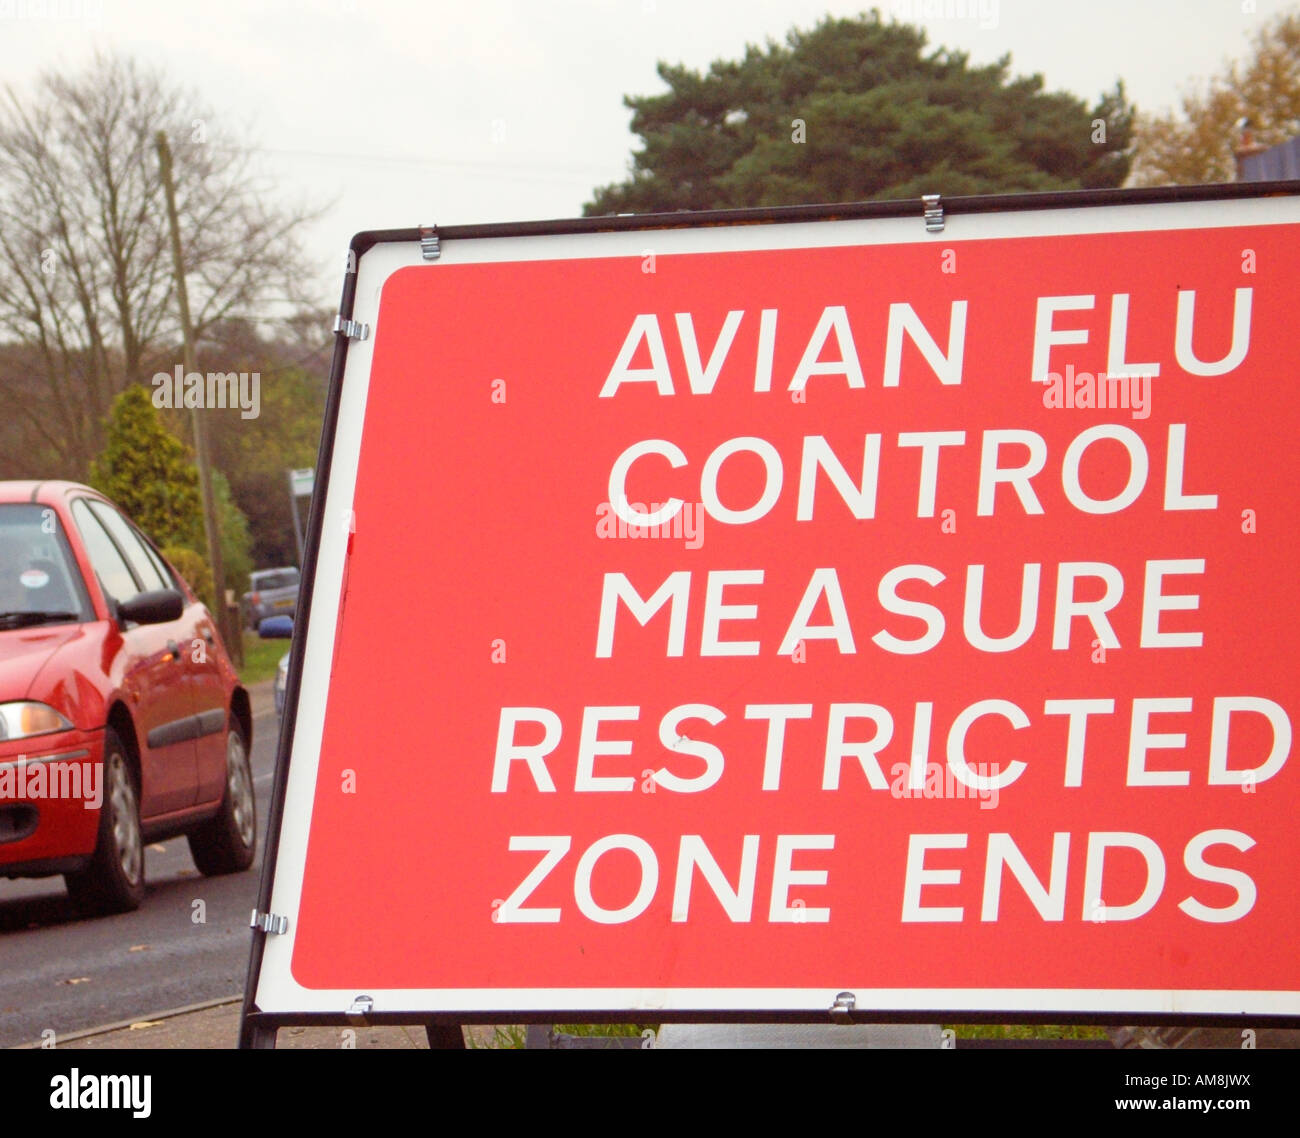 Avian Flu Control Measure Restricted Zone Ends sign. Known also as Avian influenza or Bird flu Stock Photo